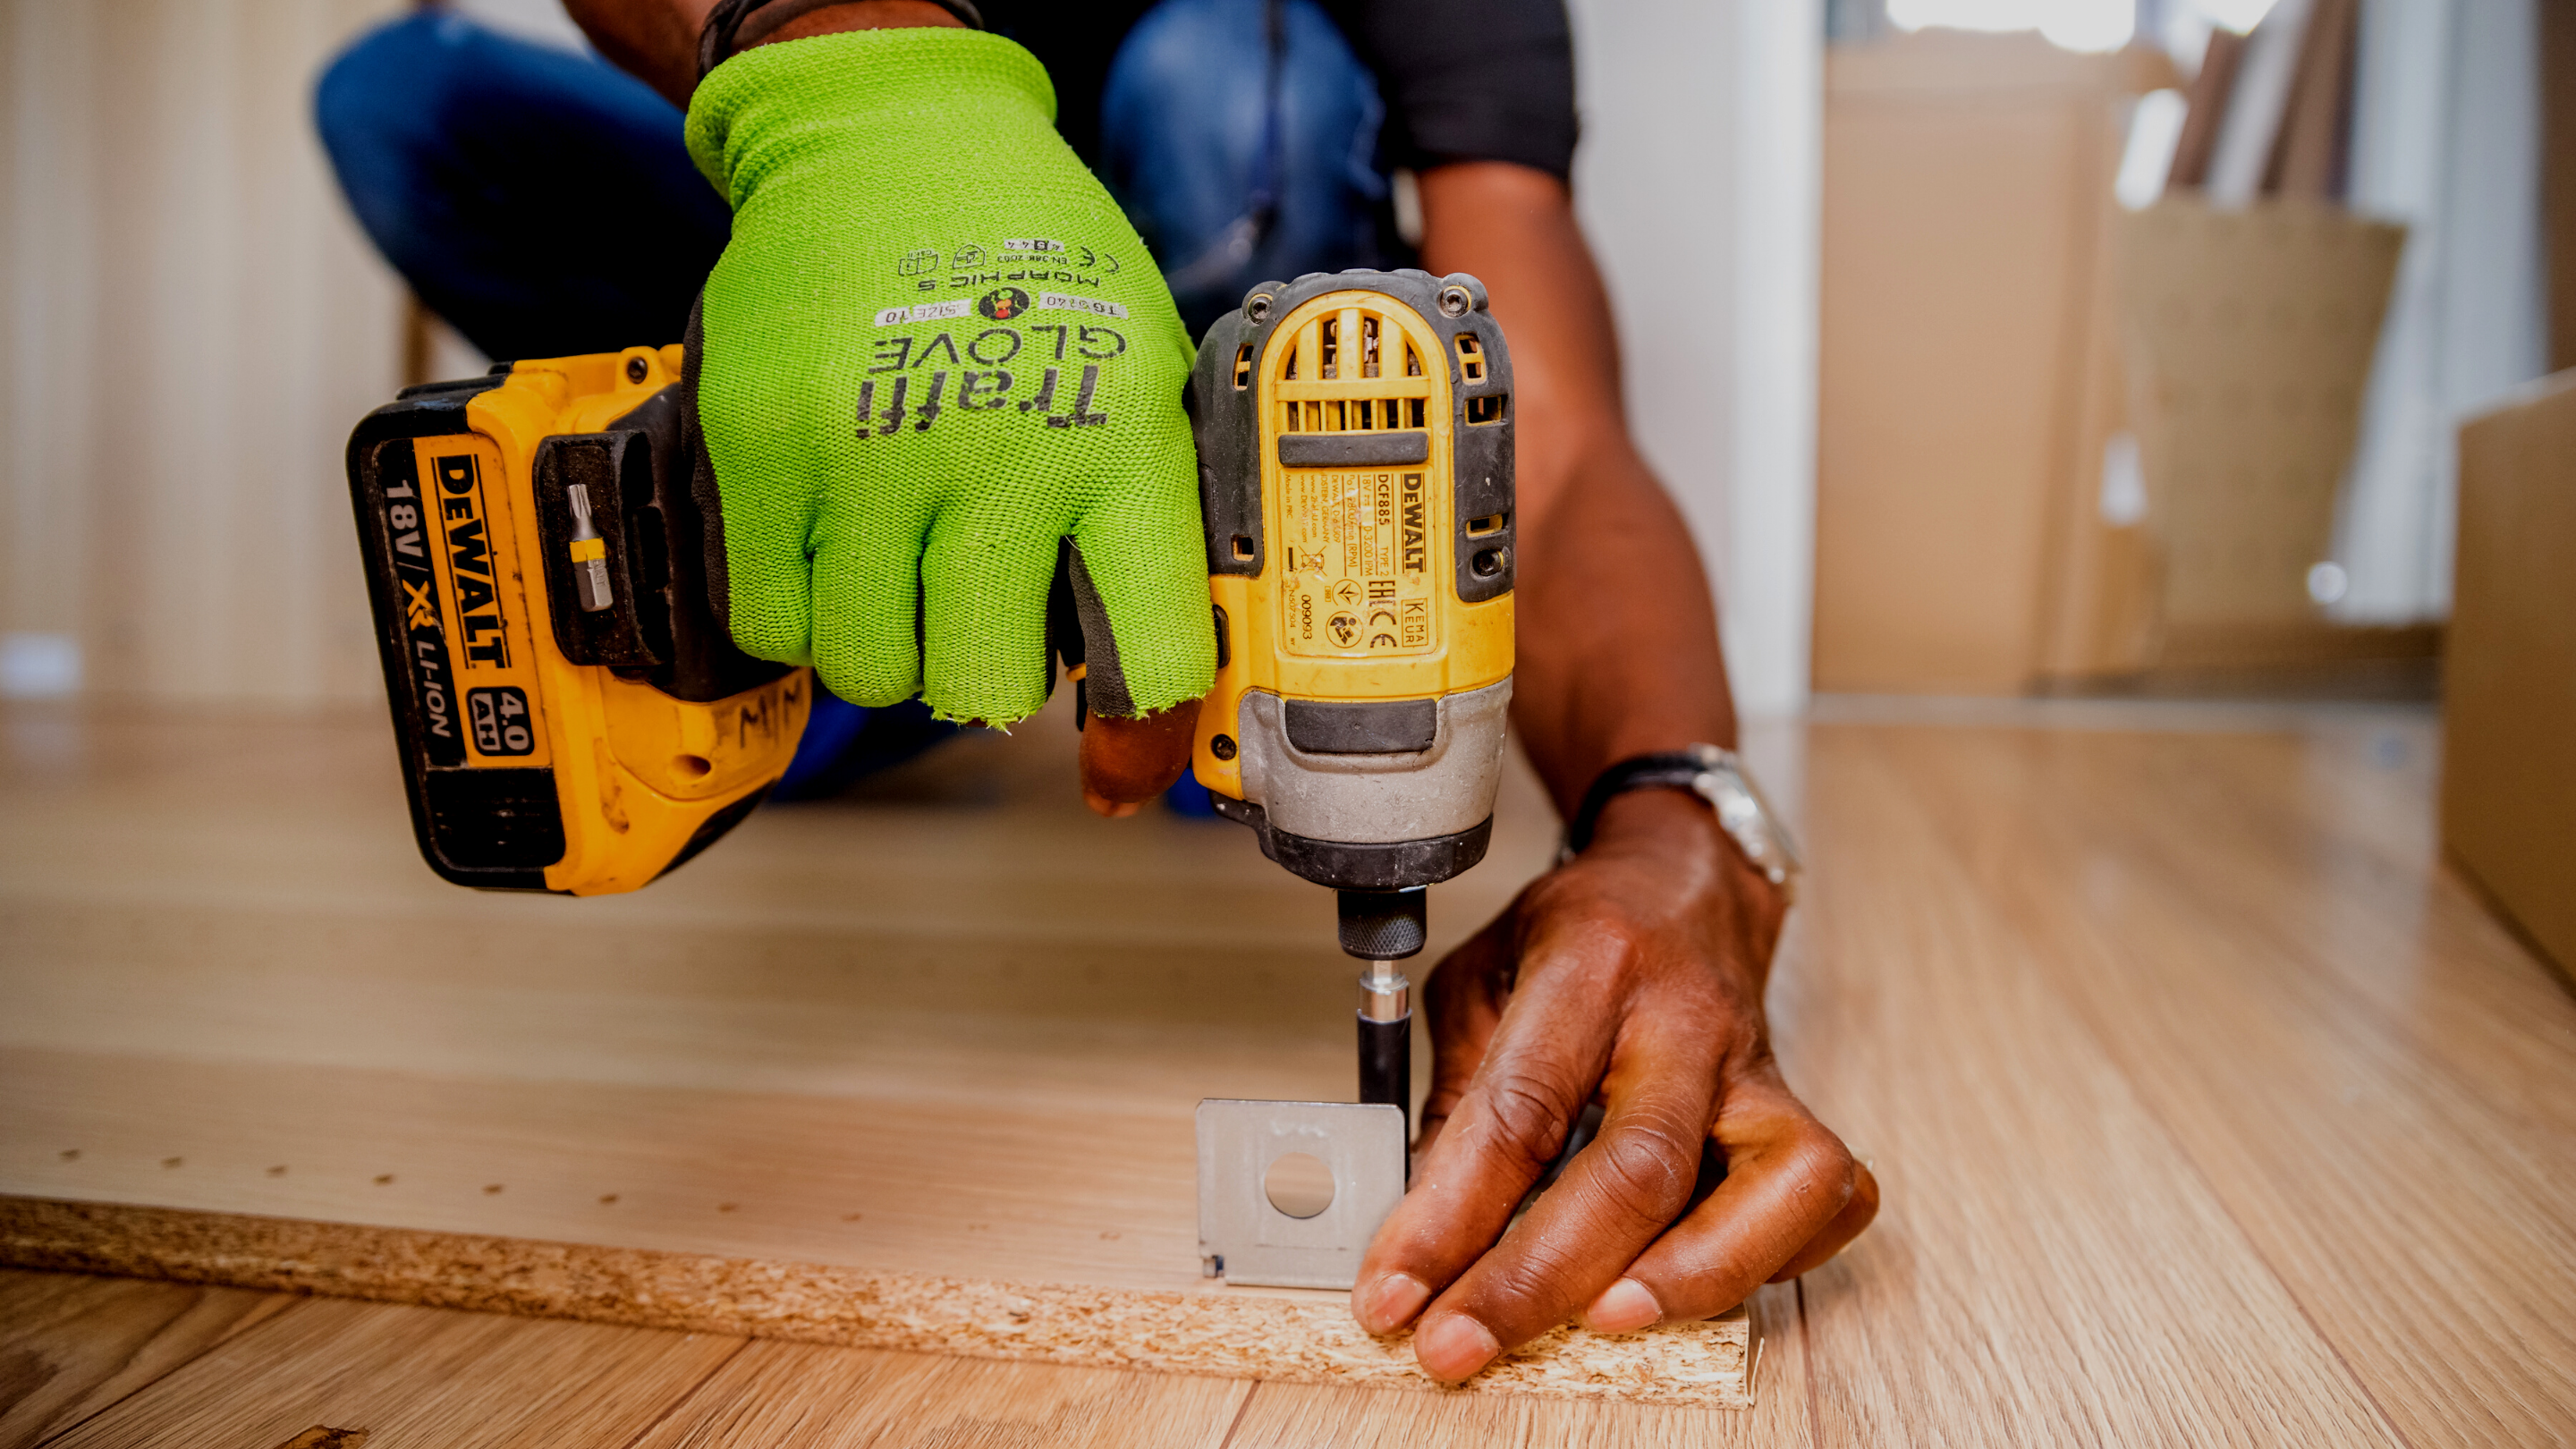 Basic Tools for Residential Construction